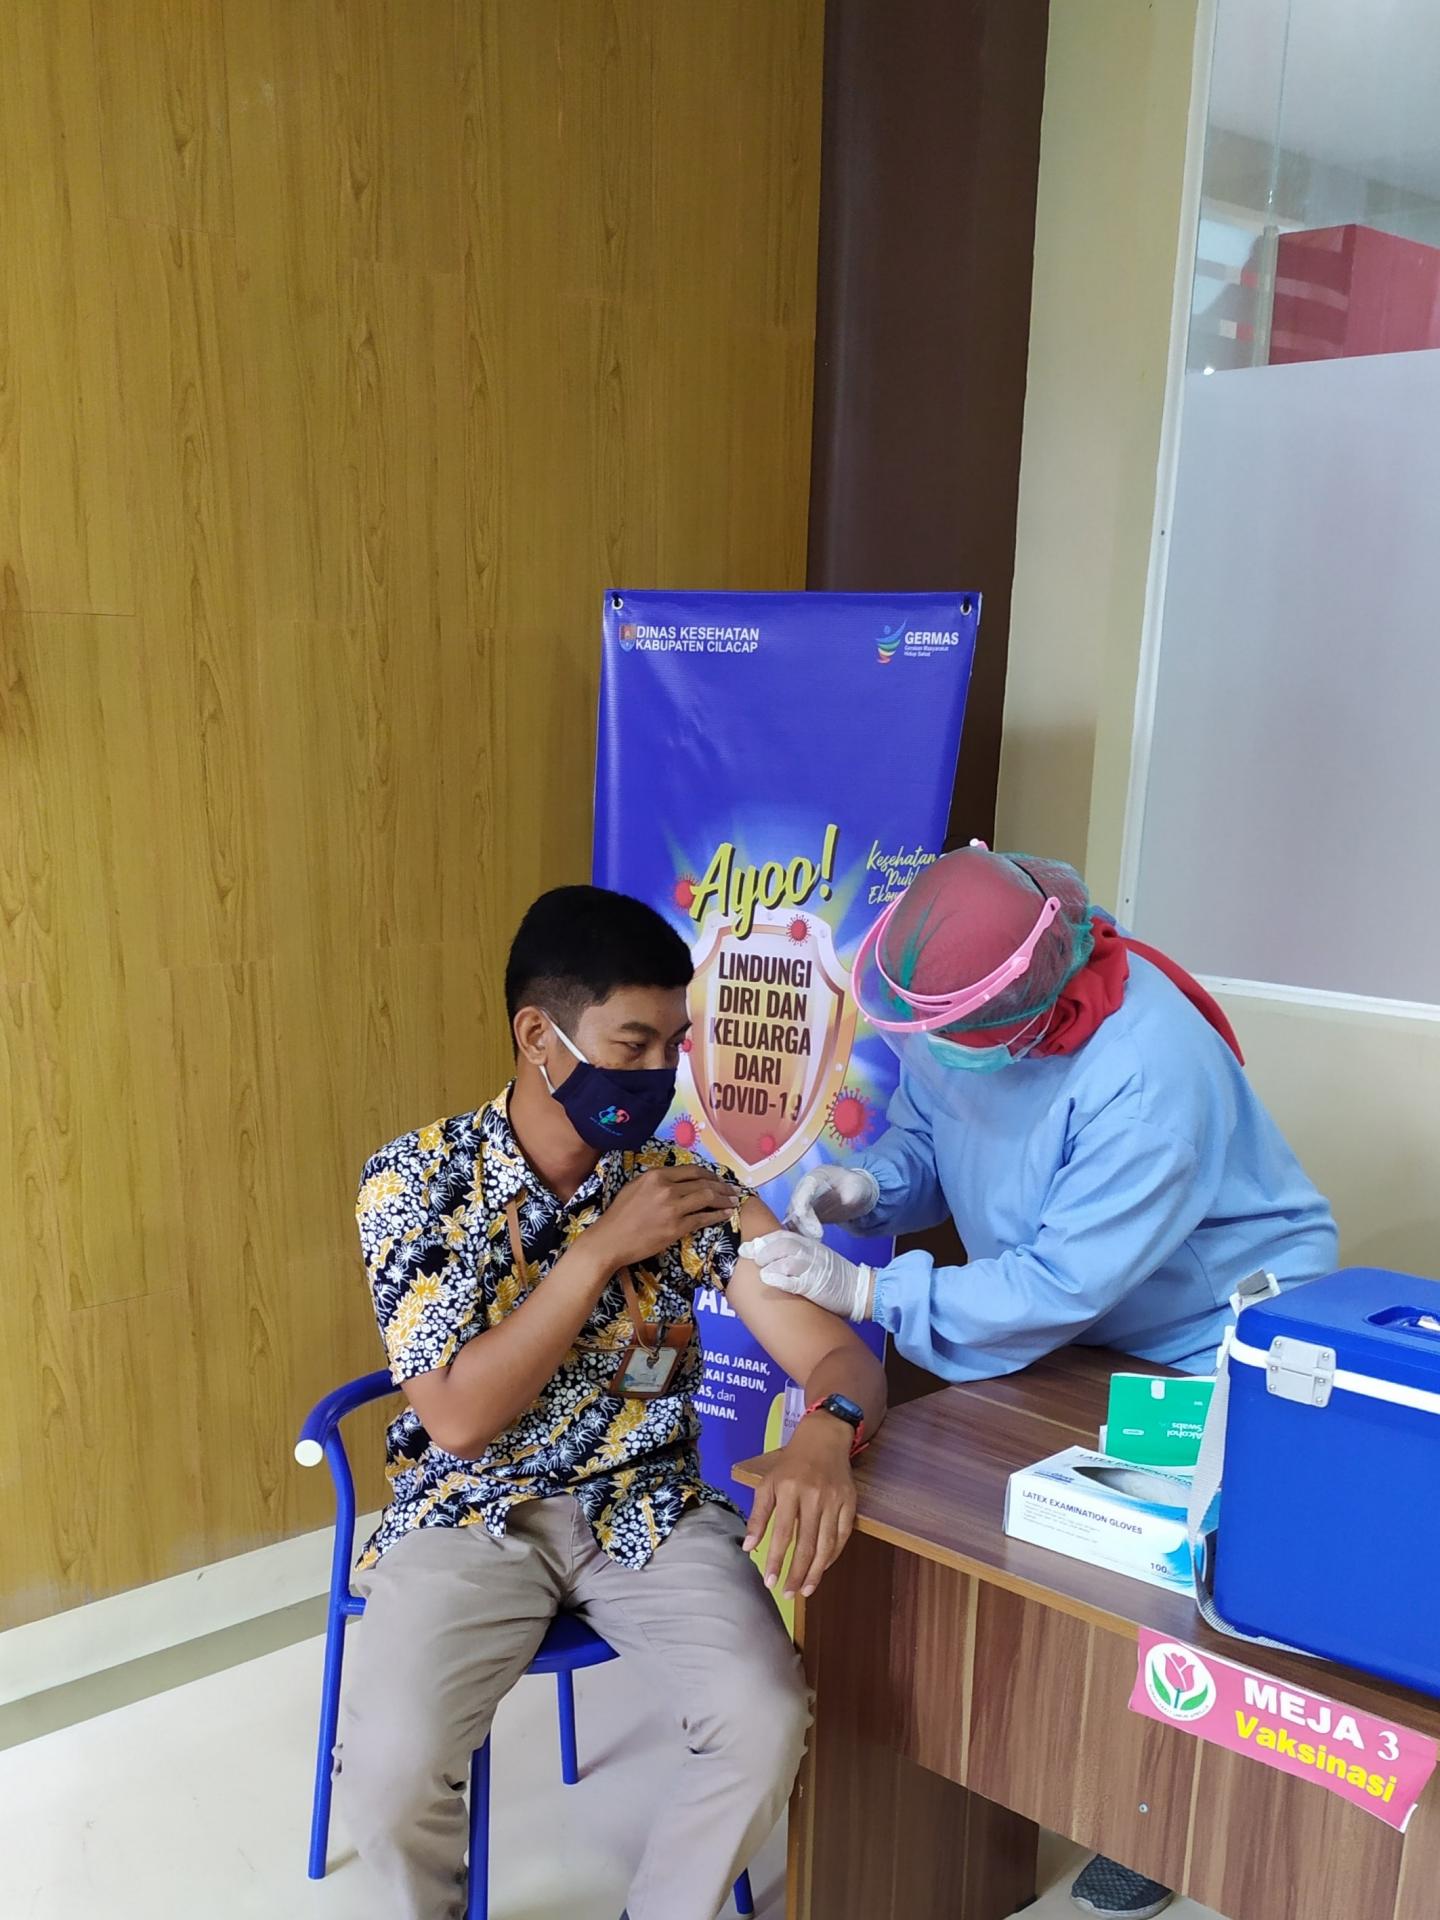 Vaccination in Indonesia